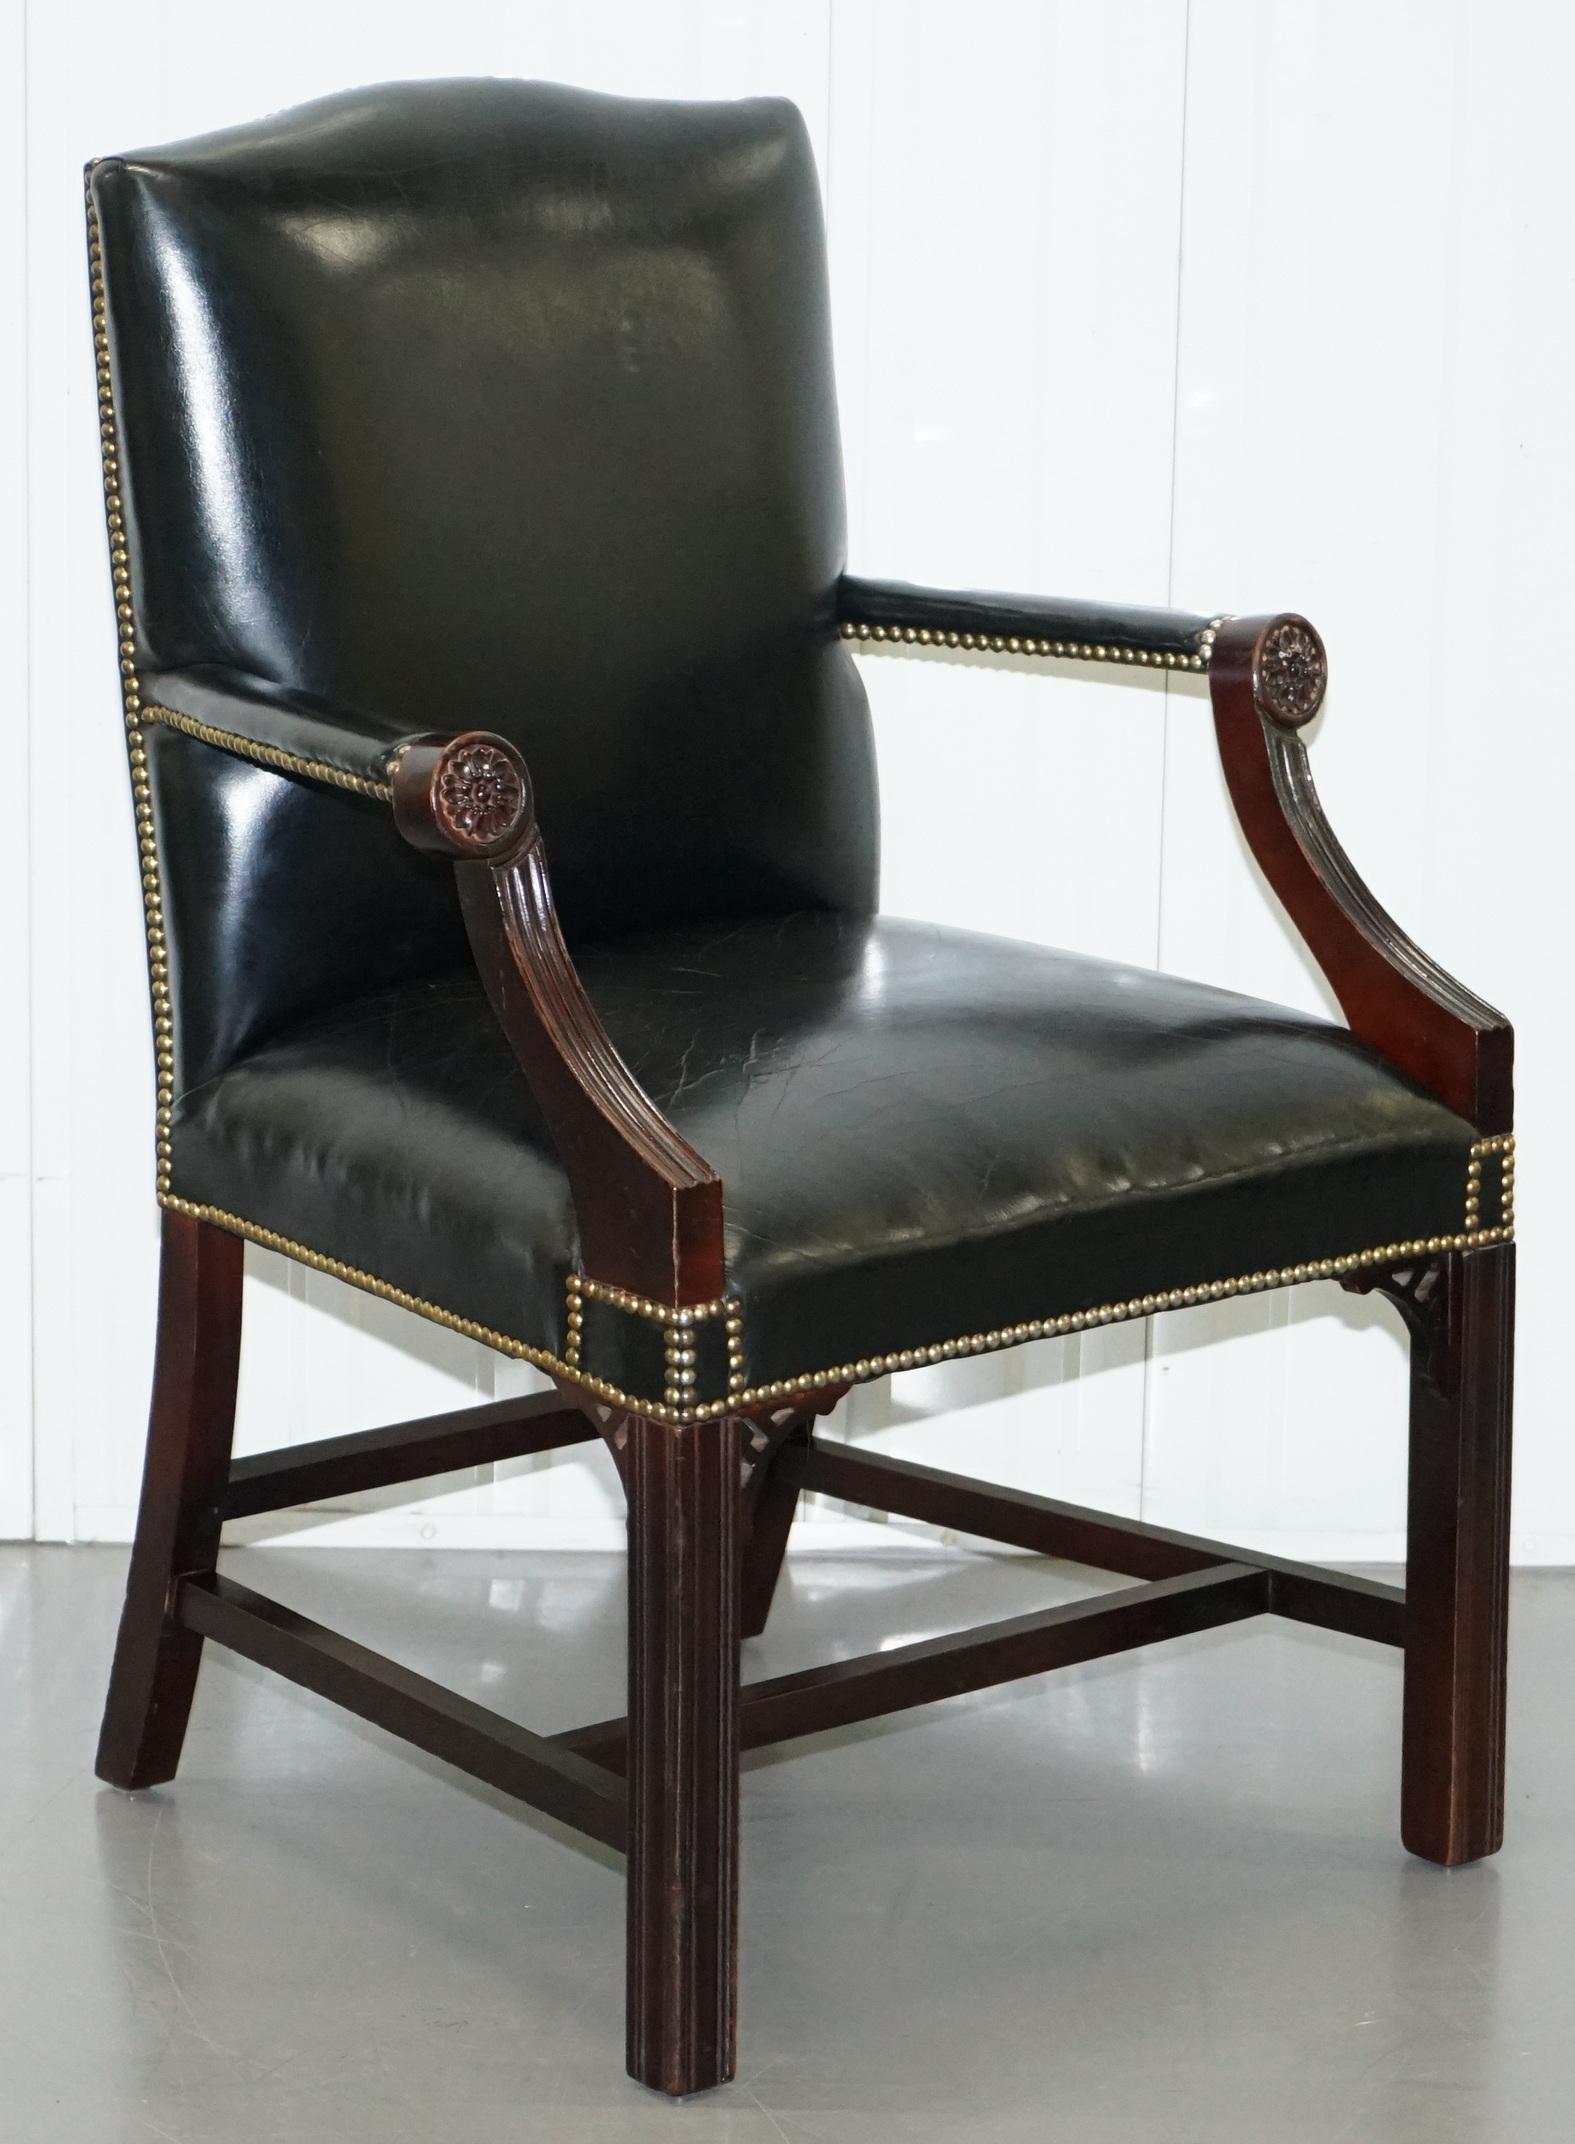 We are delighted to offer for sale this stunning vintage black leather chrome stud Gainsborough carver armchair with Thomas Chippendale style fret work carving

A very good looking and well made armchair, there are a lot of Gainsborough type